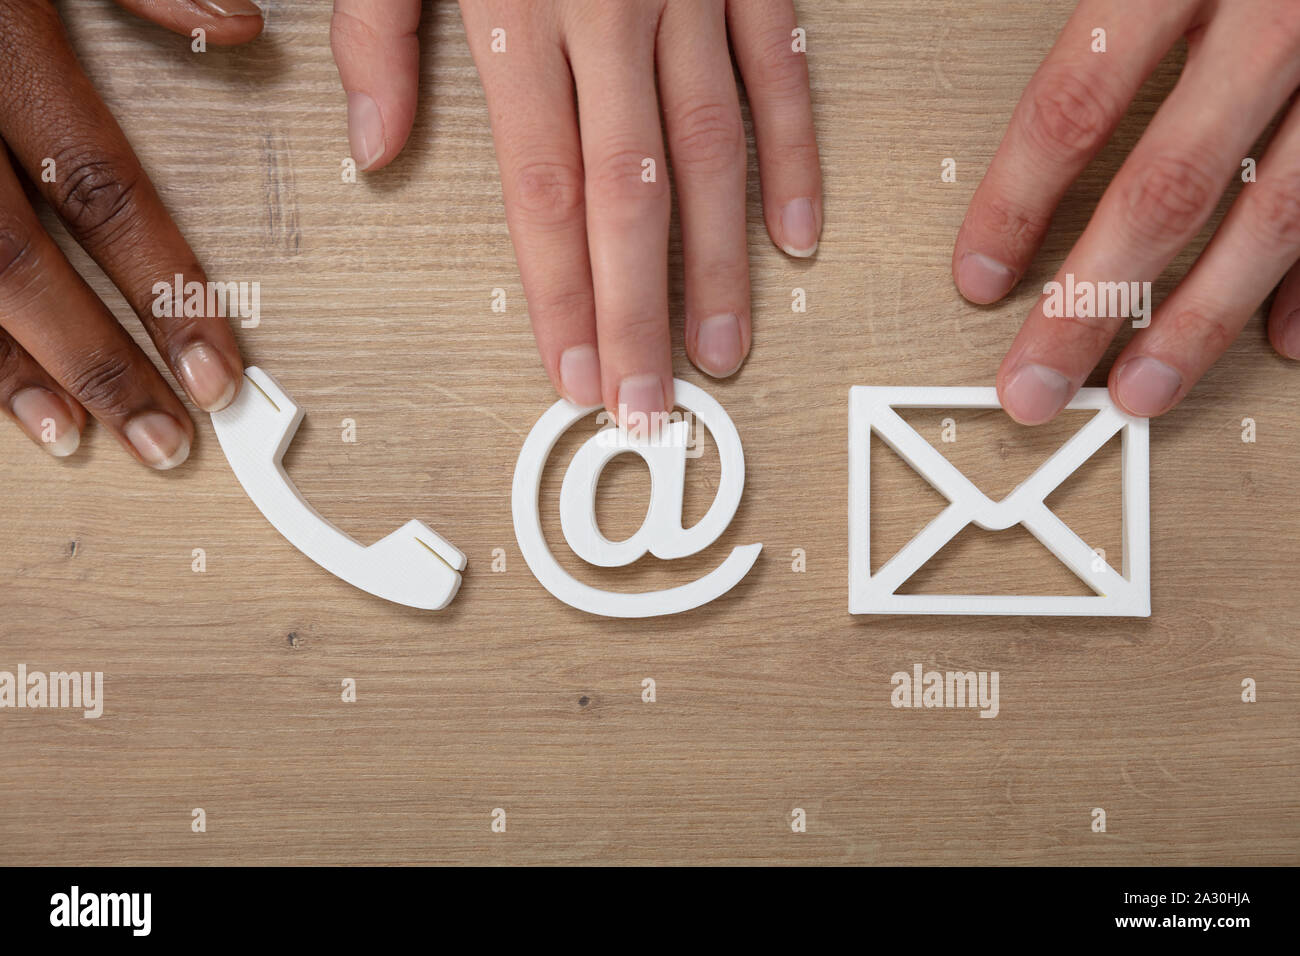 People Holding Email, Envelope, Phone, Icons On Wooden Desk Stock Photo